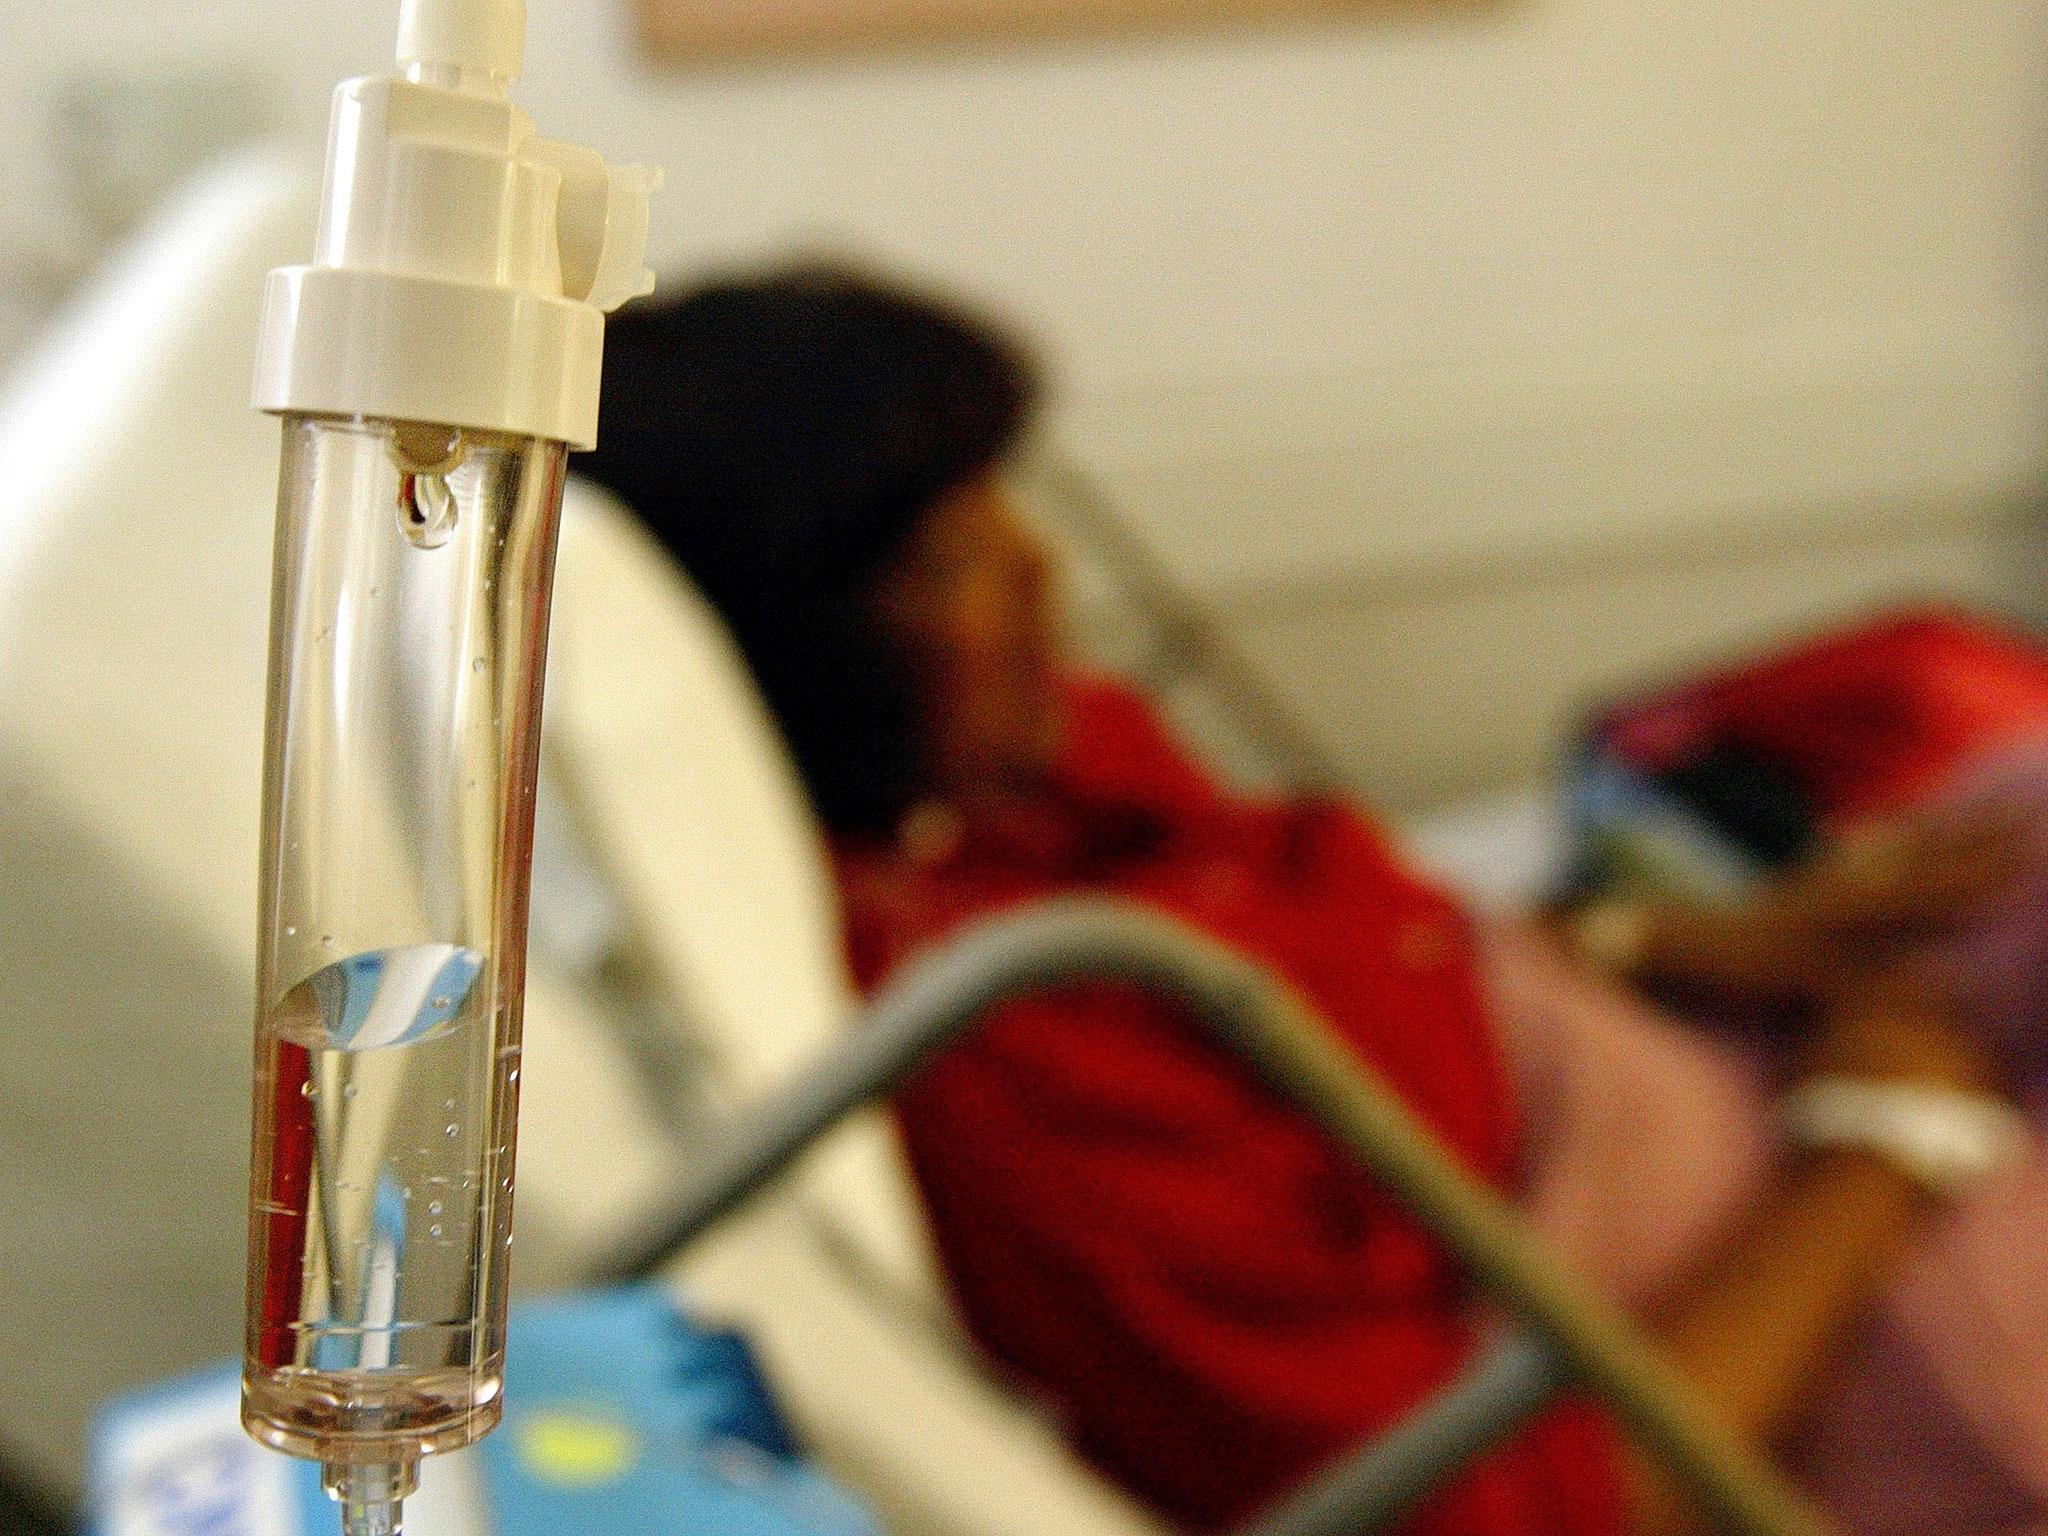 A cancer patient undergoing chemotherapy treatment